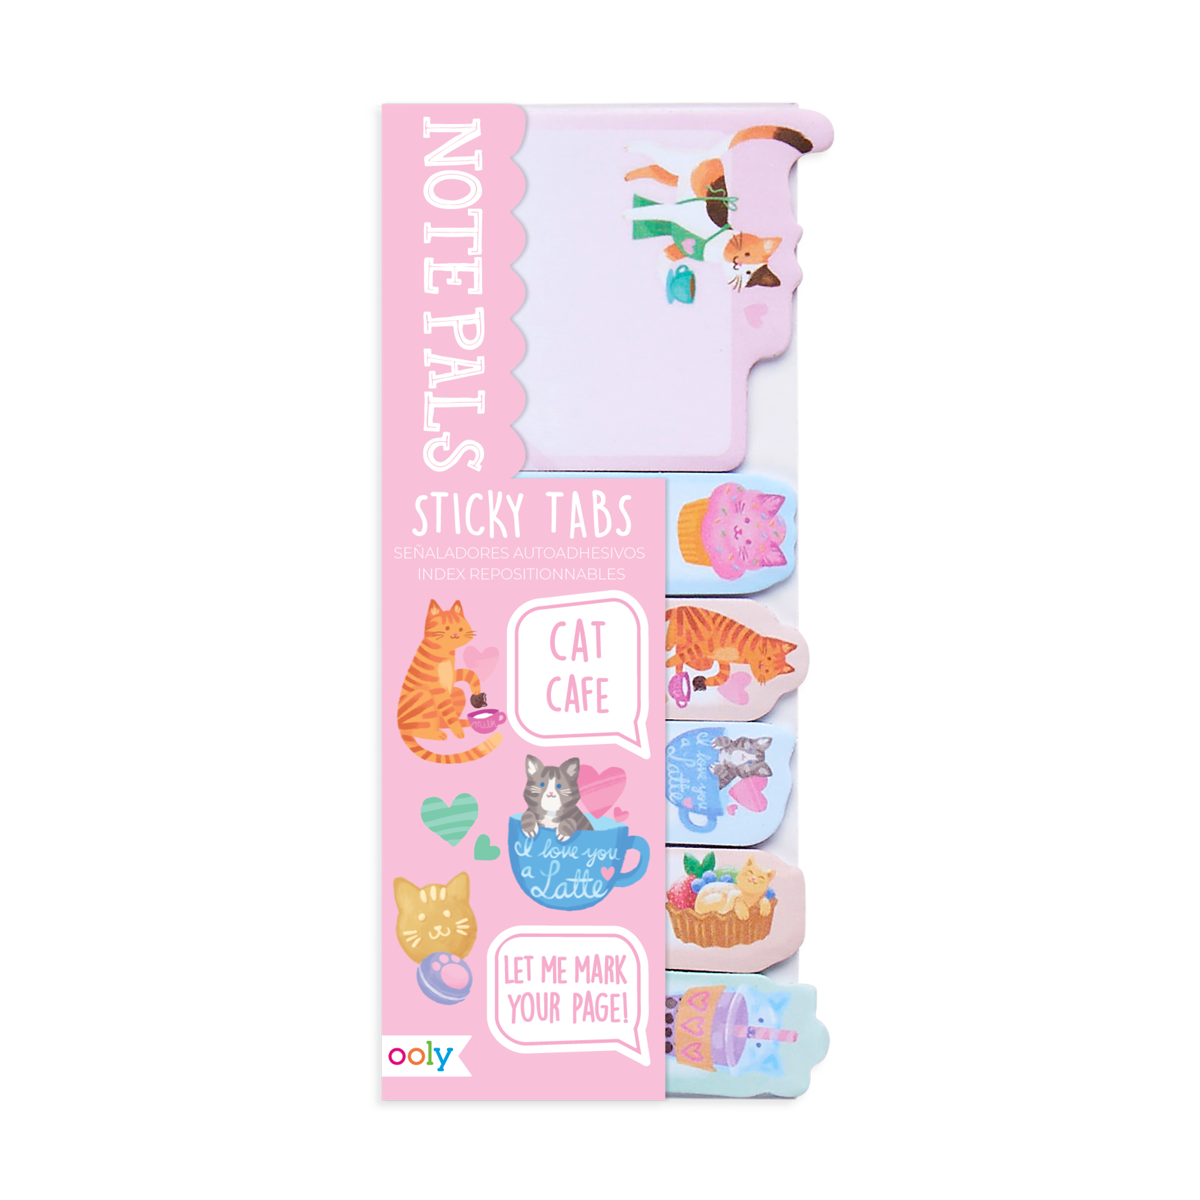 OOLY Note Pals Sticky Tabs - Cat Cafe in packaging